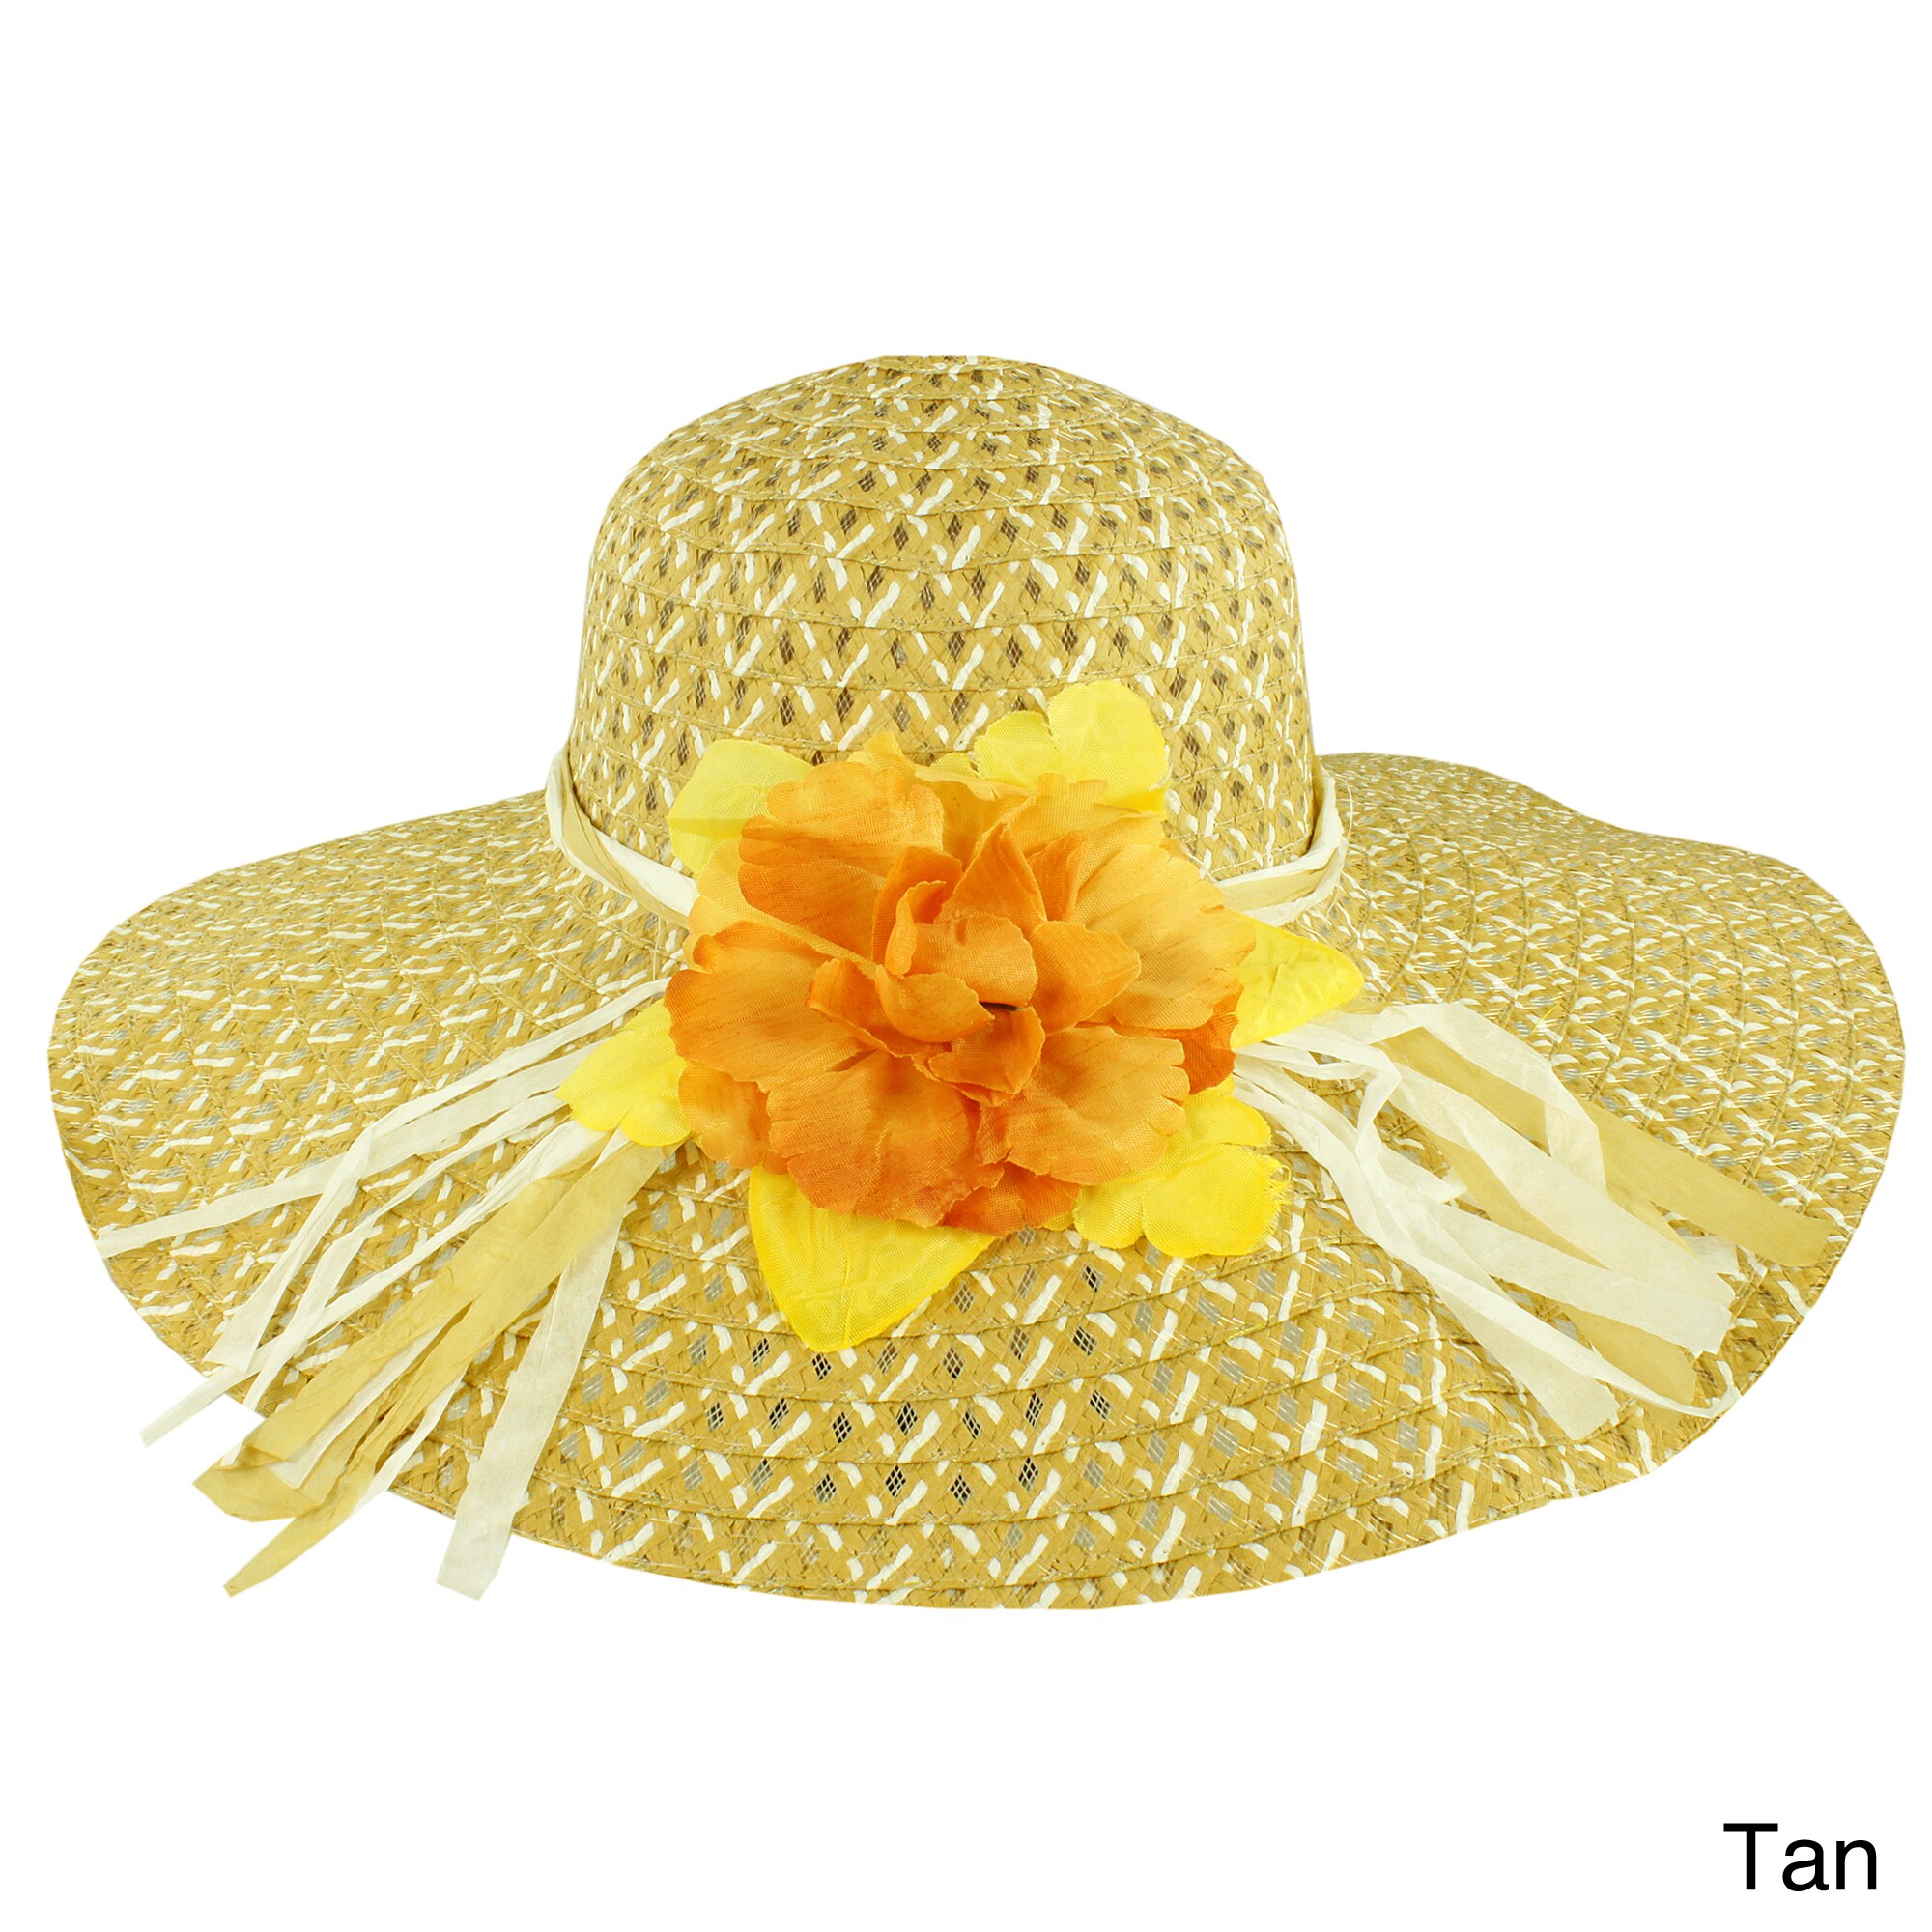 Faddism Faddism Womens Hawaiian Floral Floppy Hat Tan Size One Size Fits Most